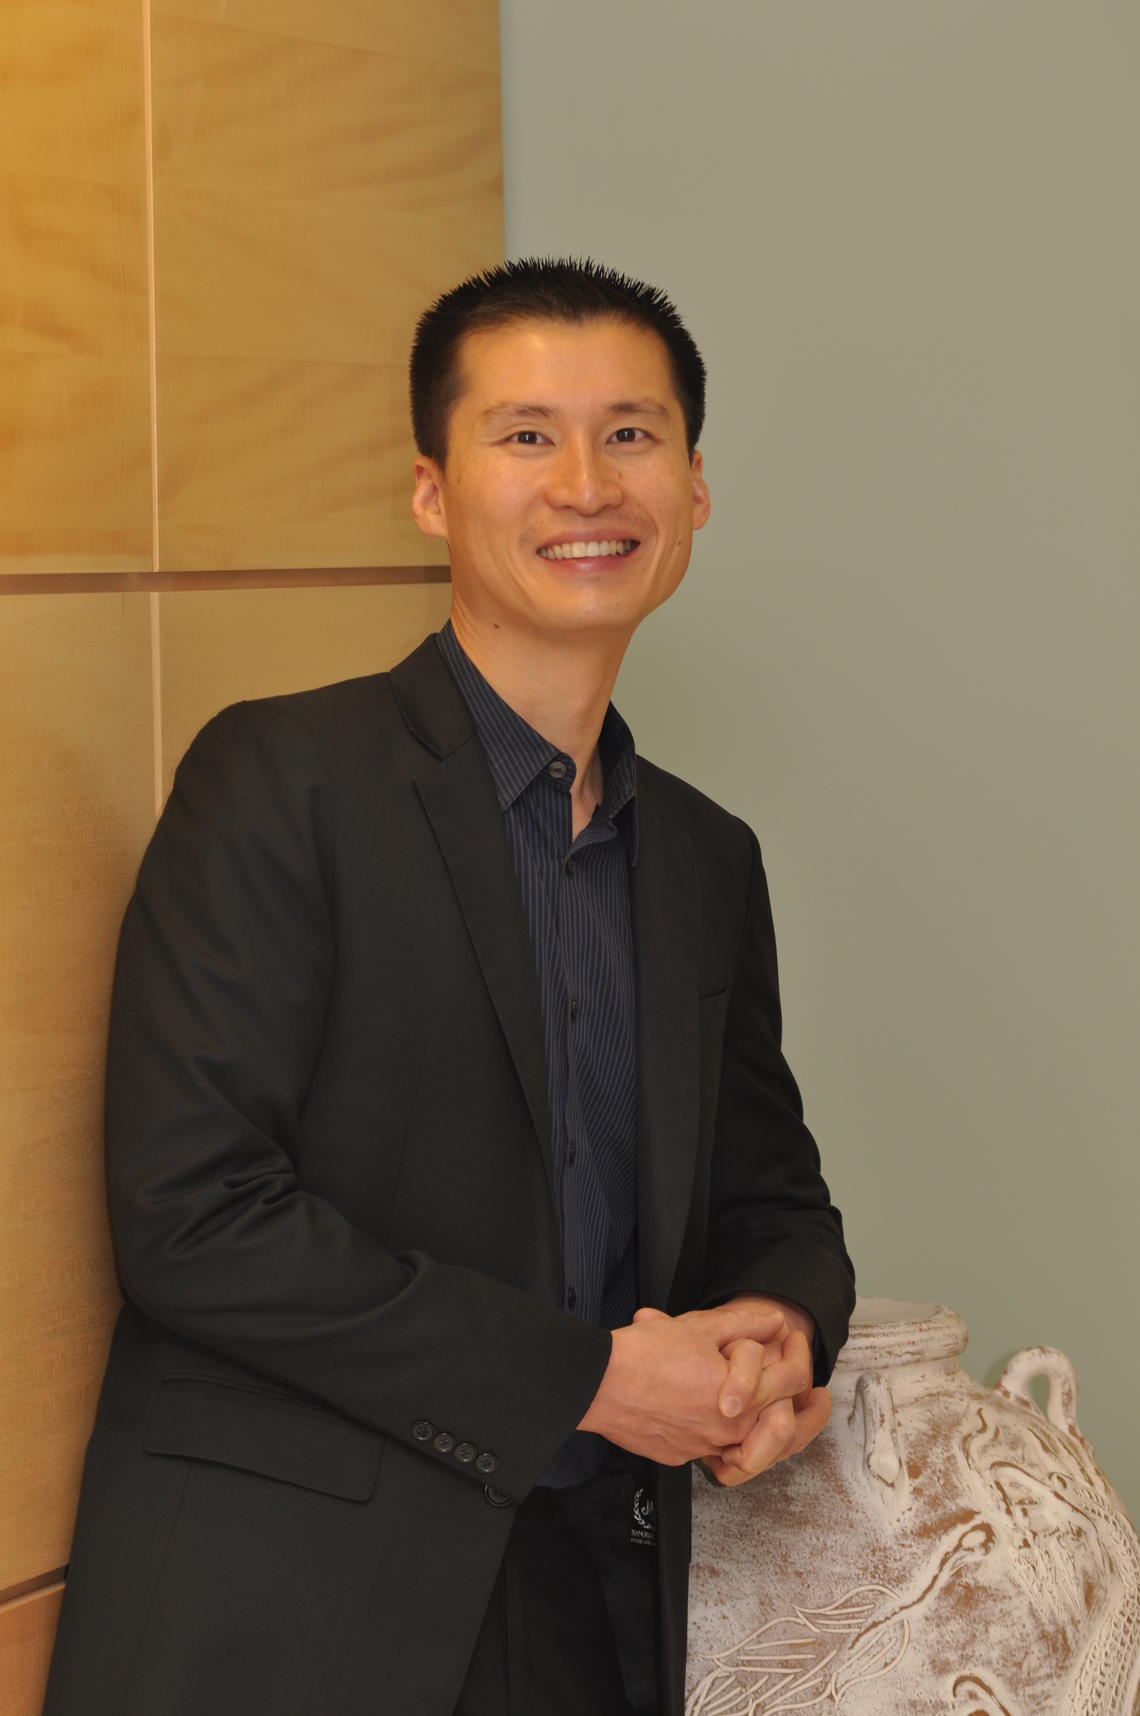 Dr. Daniel Heng is a clinical associate professor in the Department of Oncology at the Cumming School of Medicine.